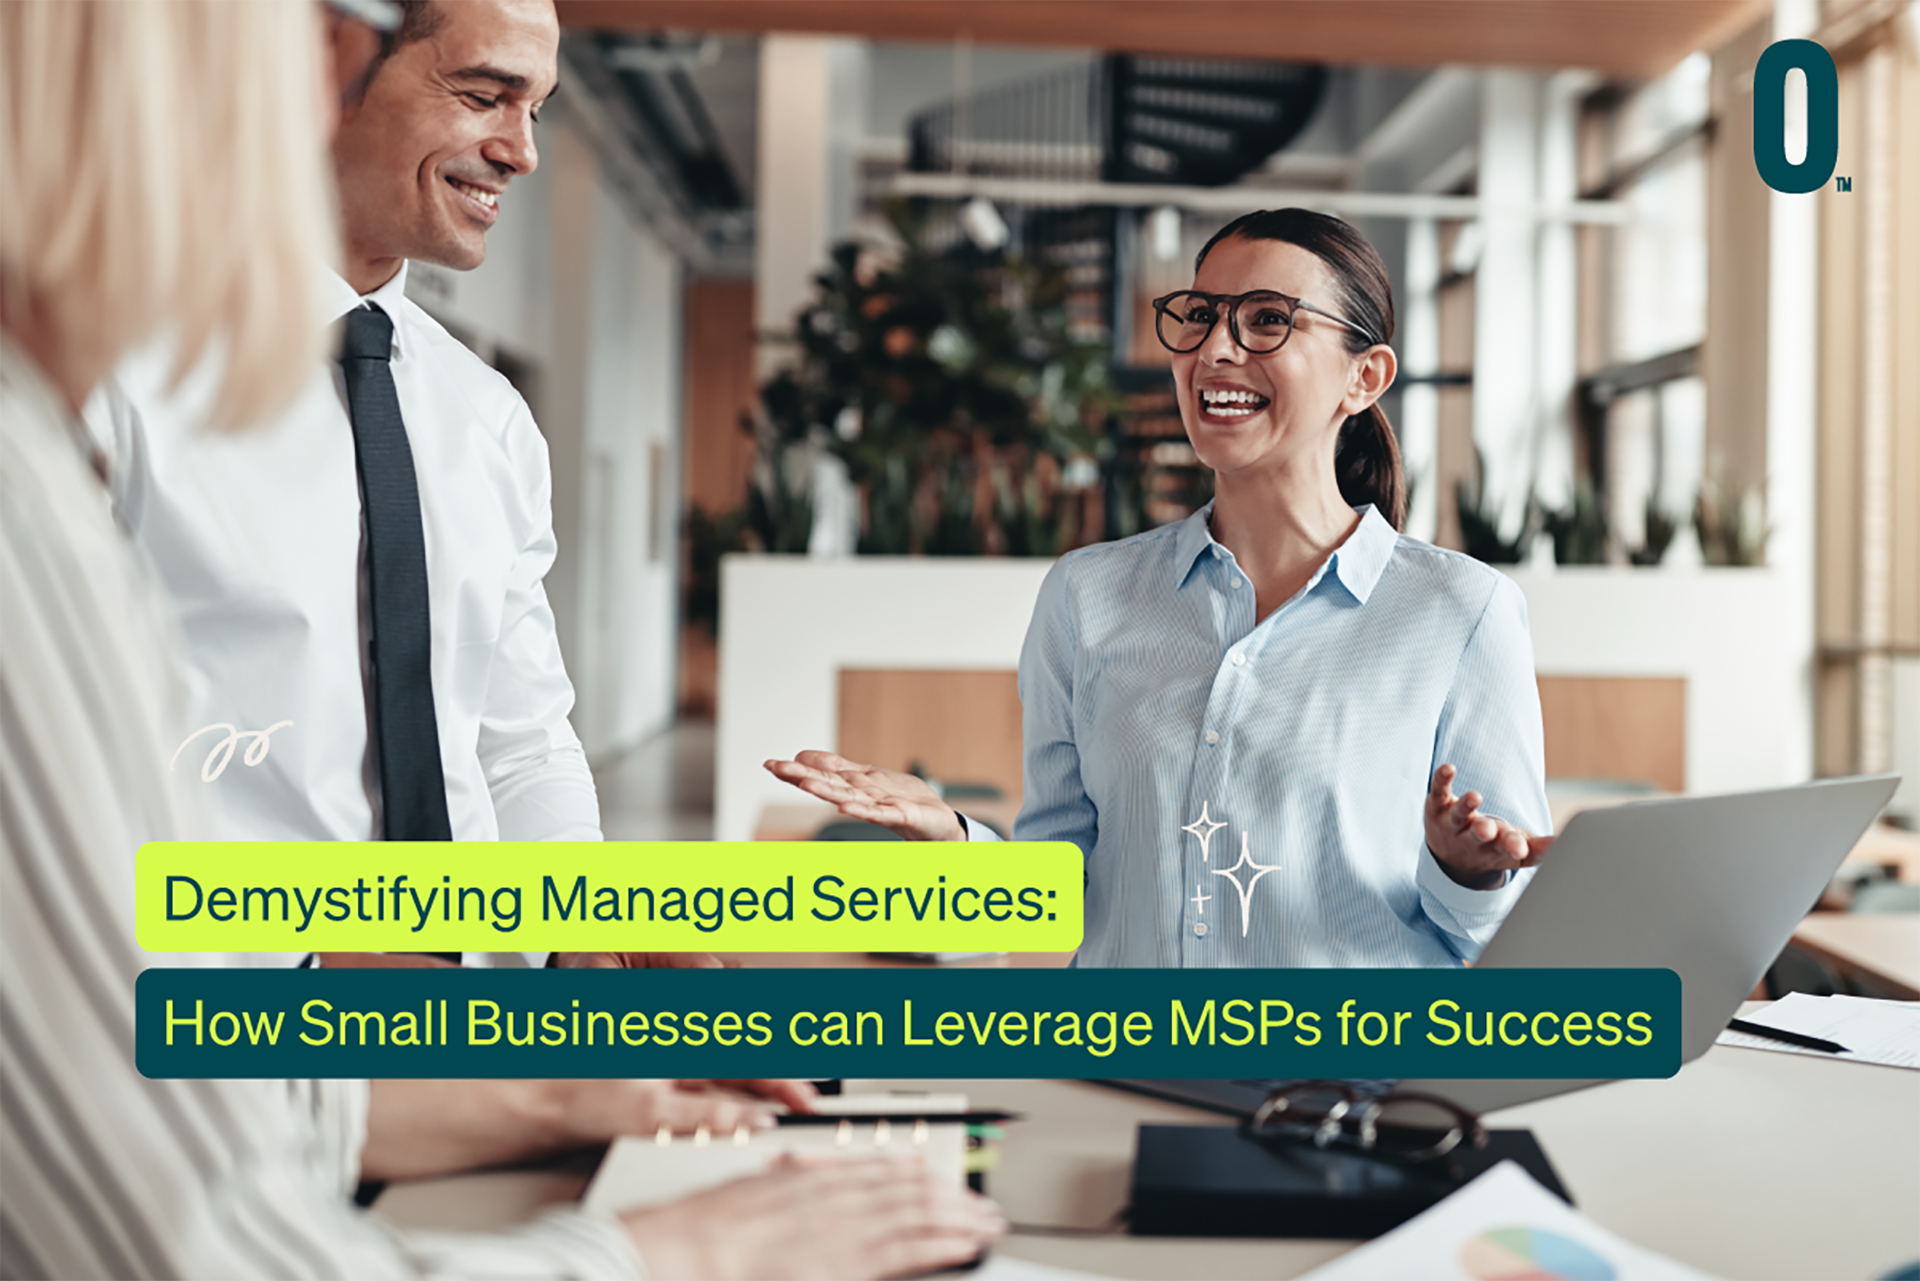 , Demystifying Managed Services: How Small Businesses Can Leverage MSPs for Success